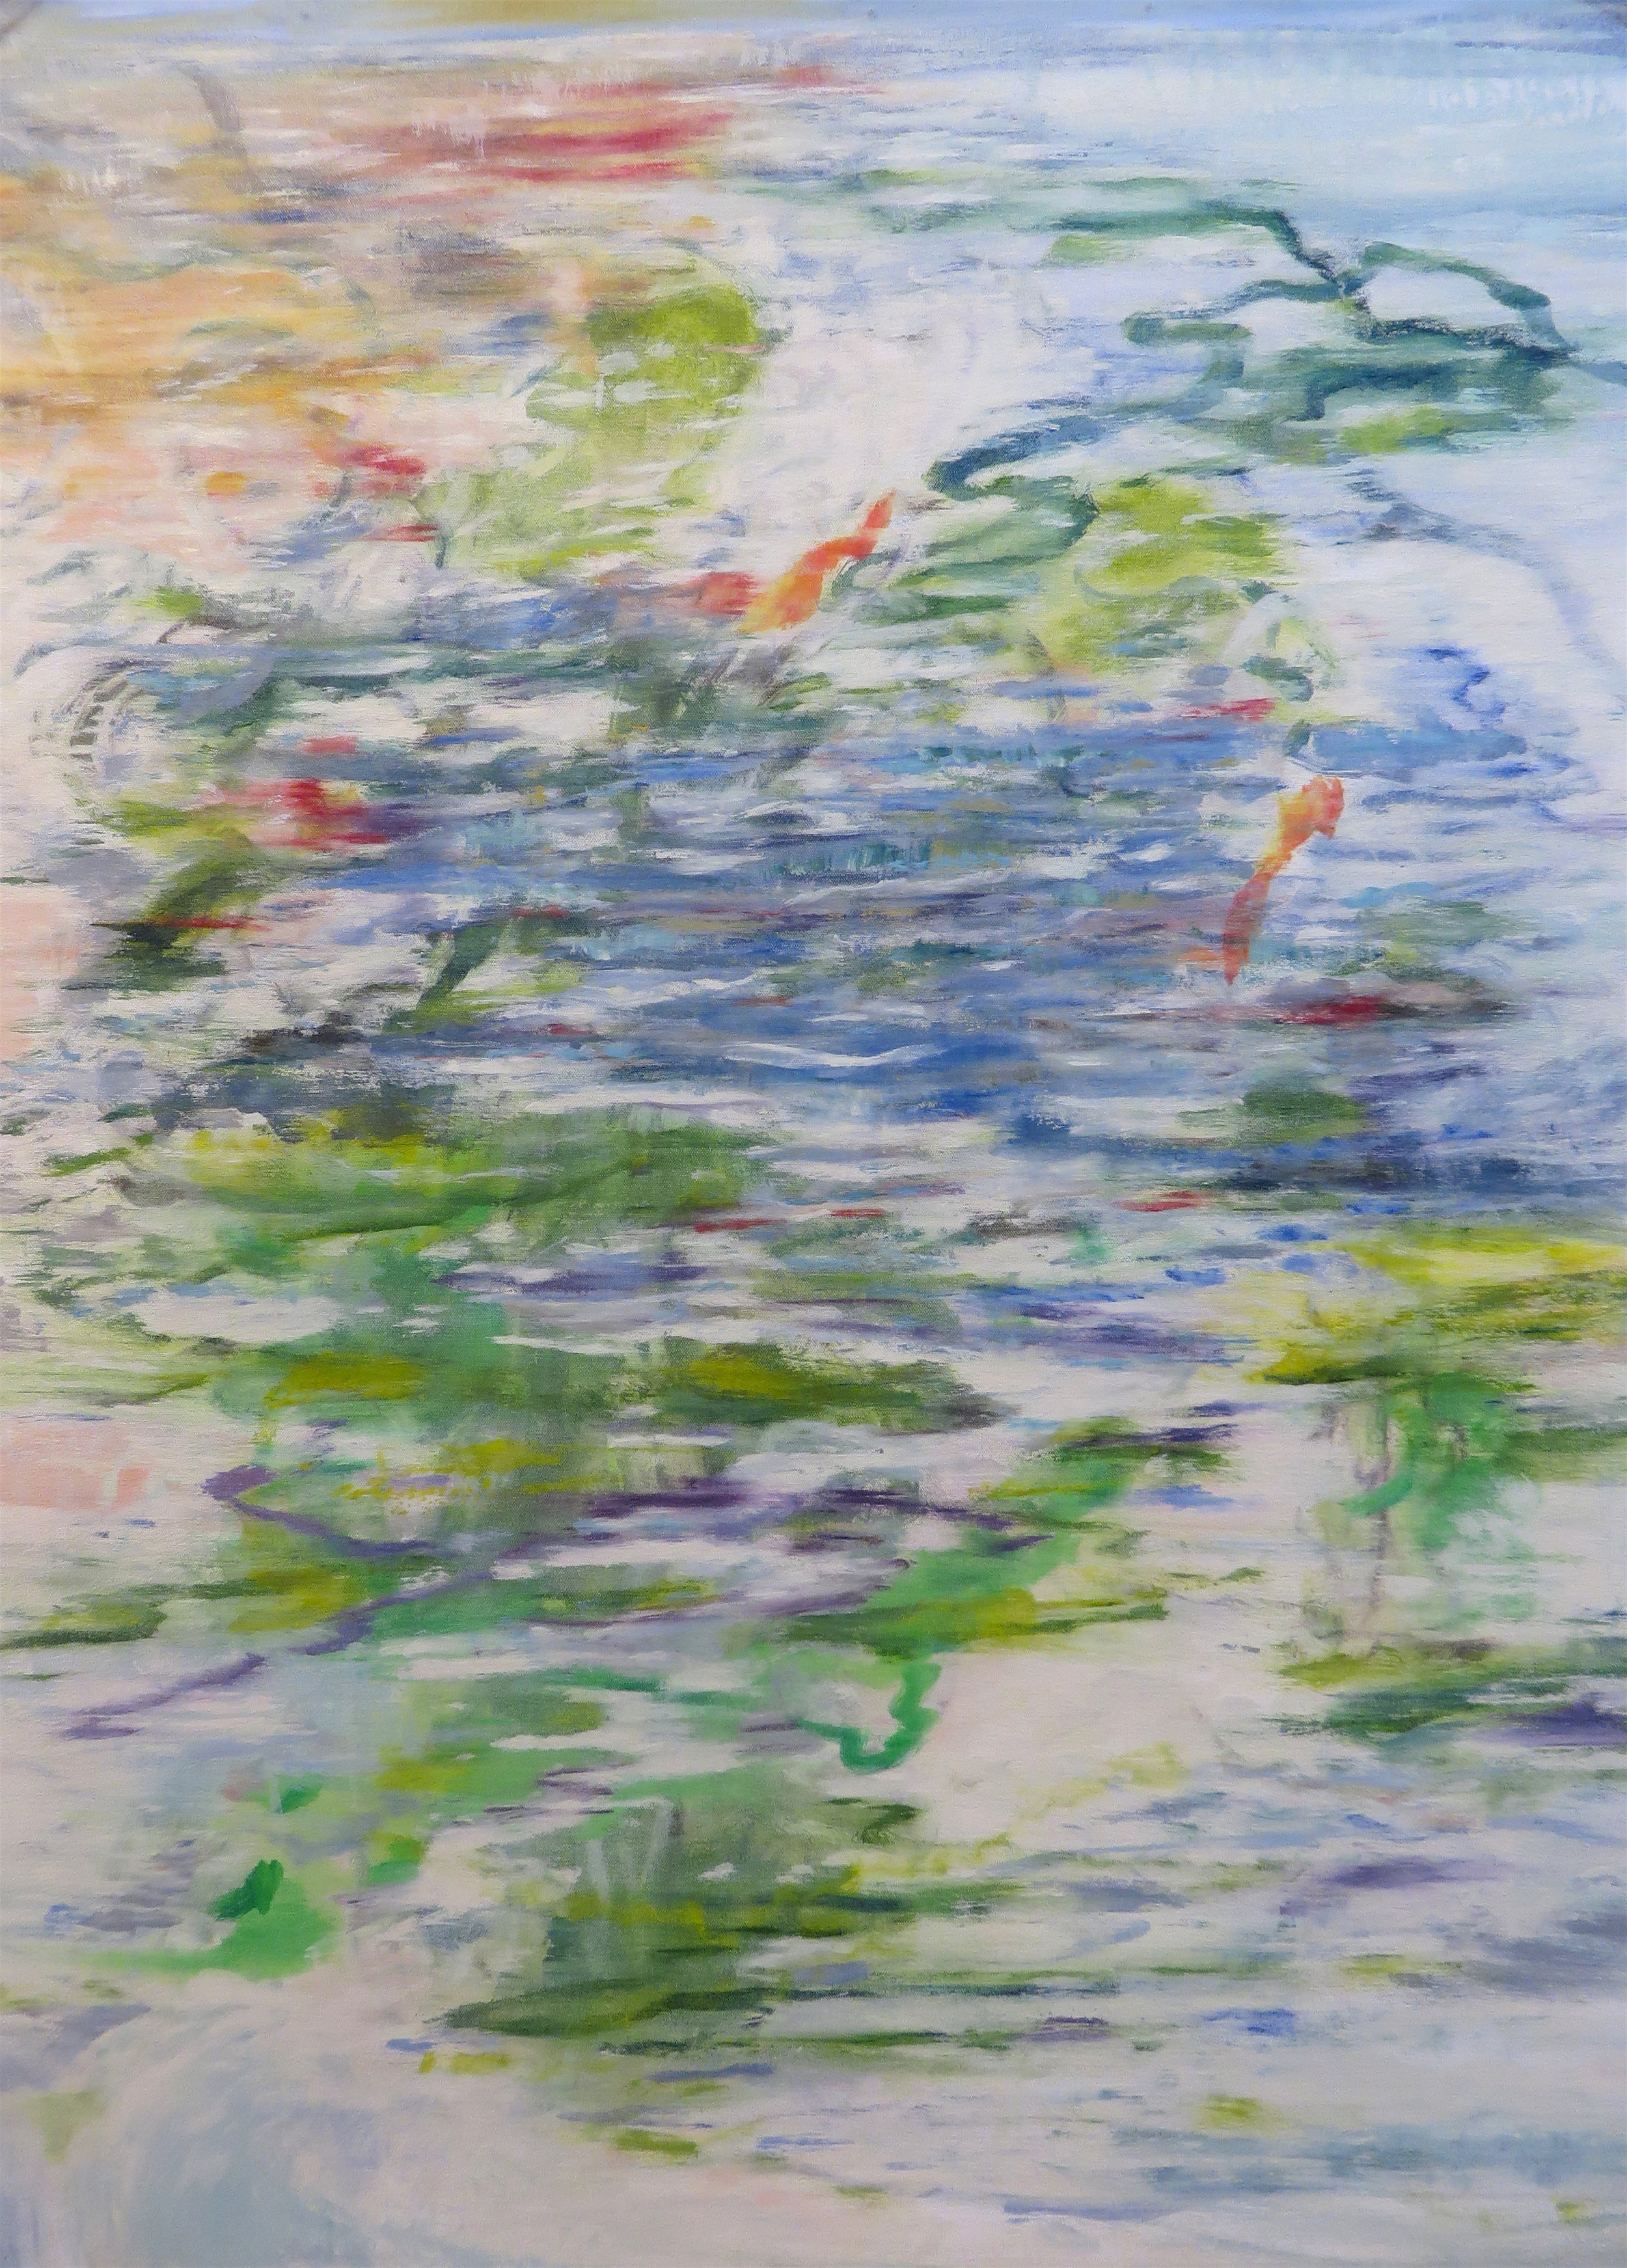 SOLD - Water Series, 2012 